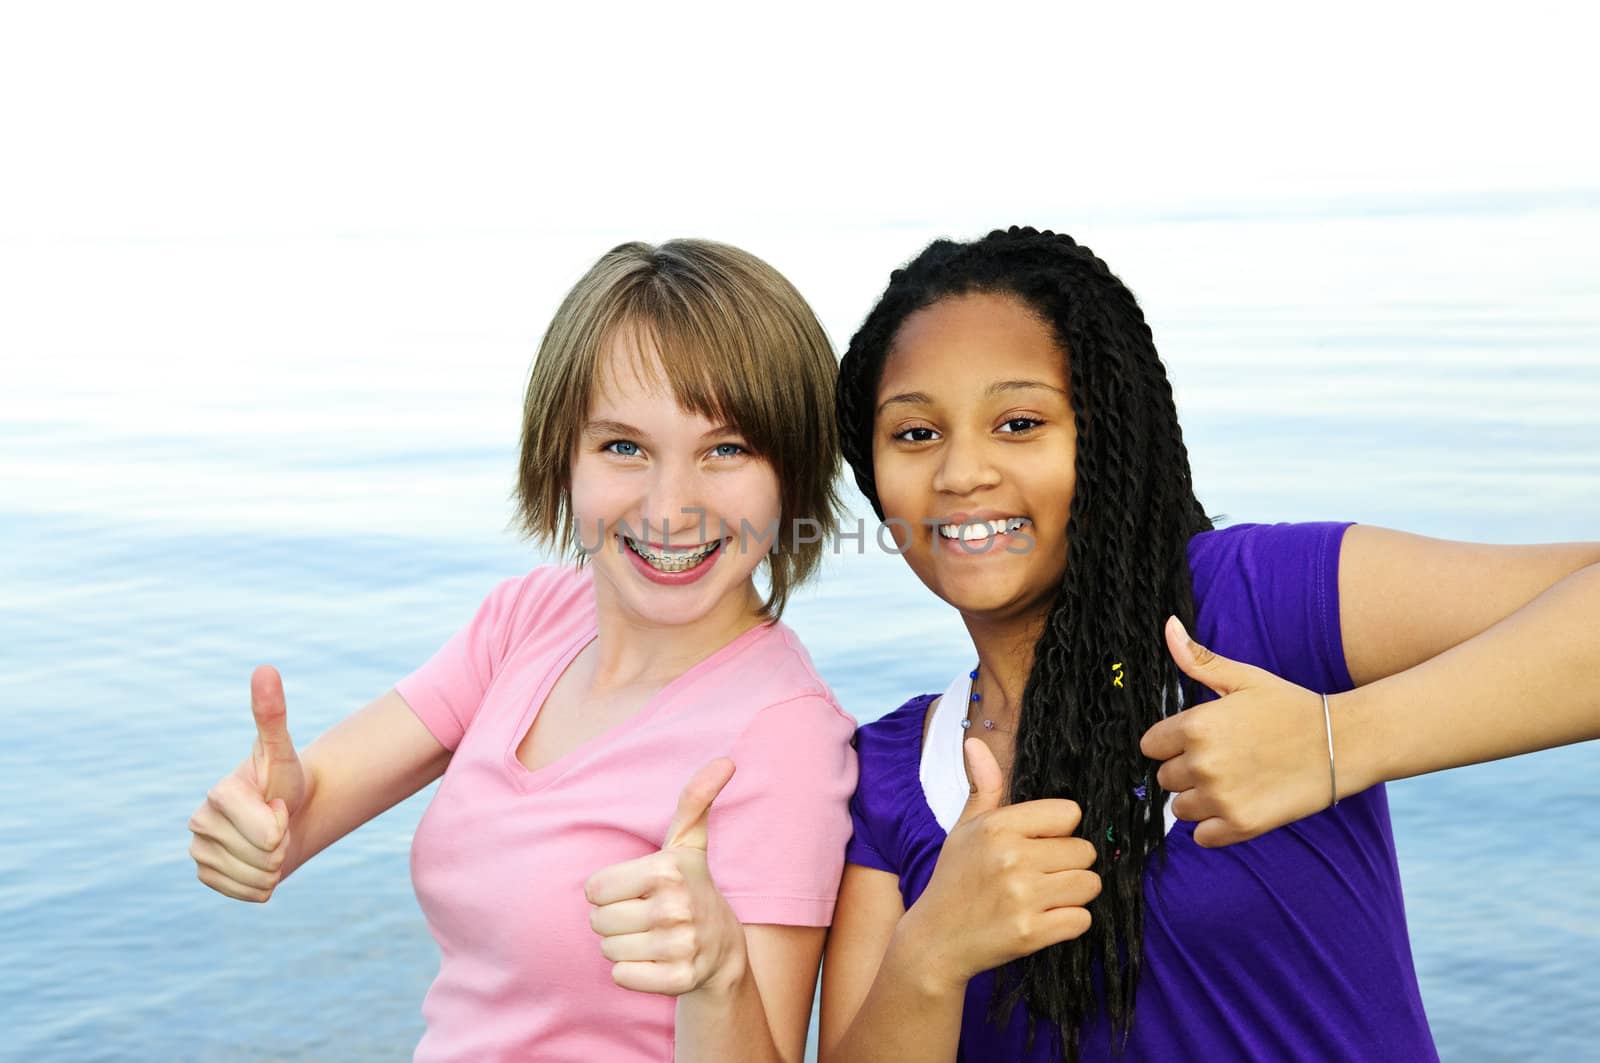 Portrait of two teenage girl friends showing thumbs up